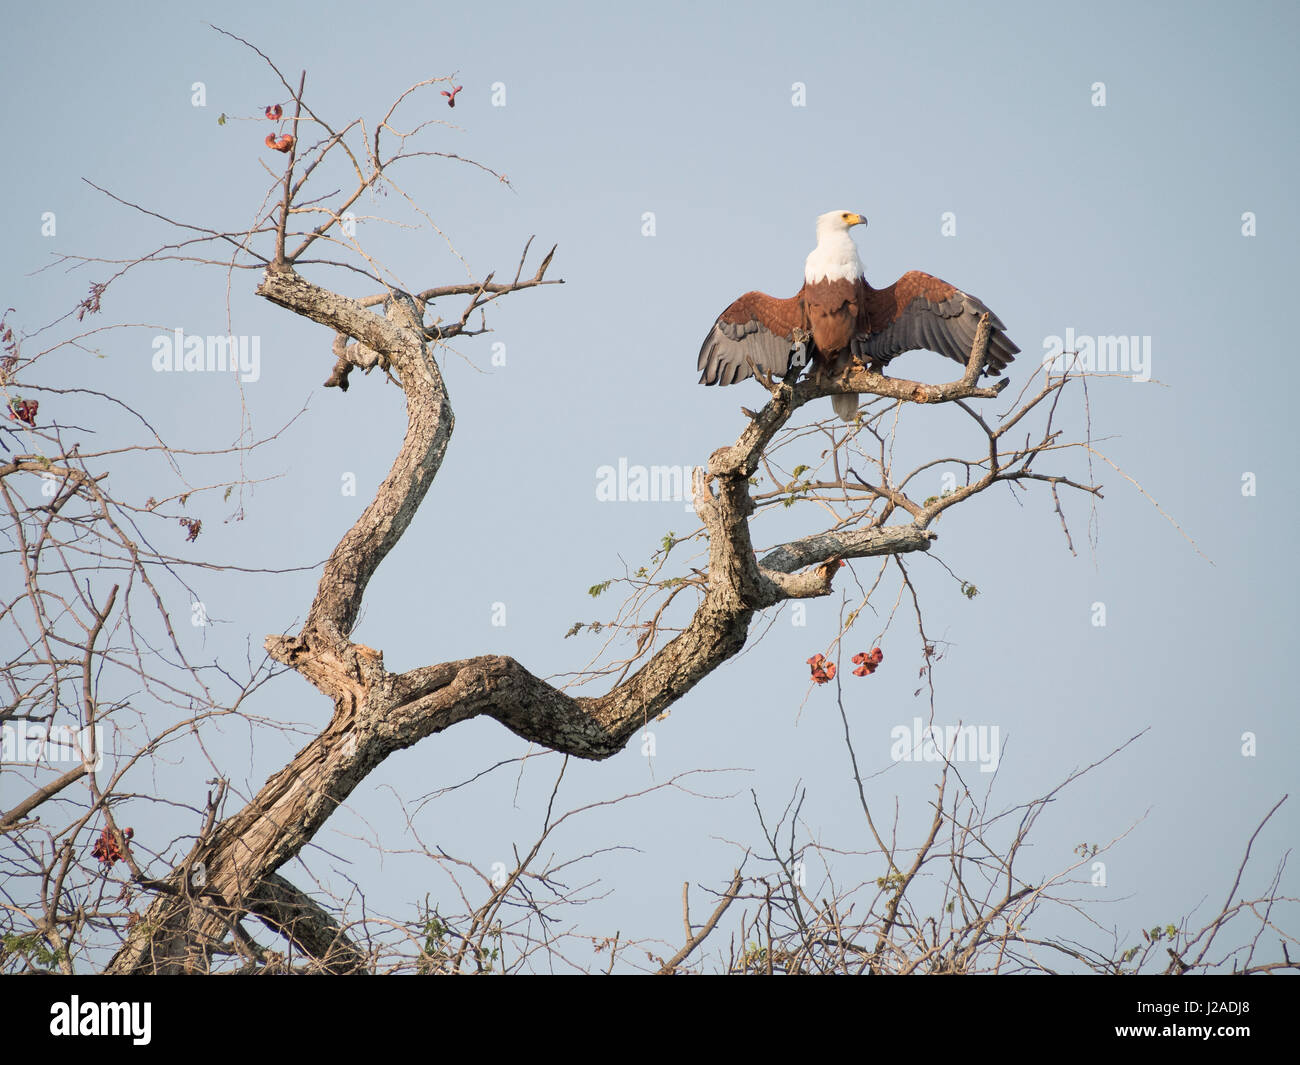 Africa, Zambia. Fish eagle on tree limb. Credit as: Bill Young / Jaynes Gallery / DanitaDelimont.com Stock Photo